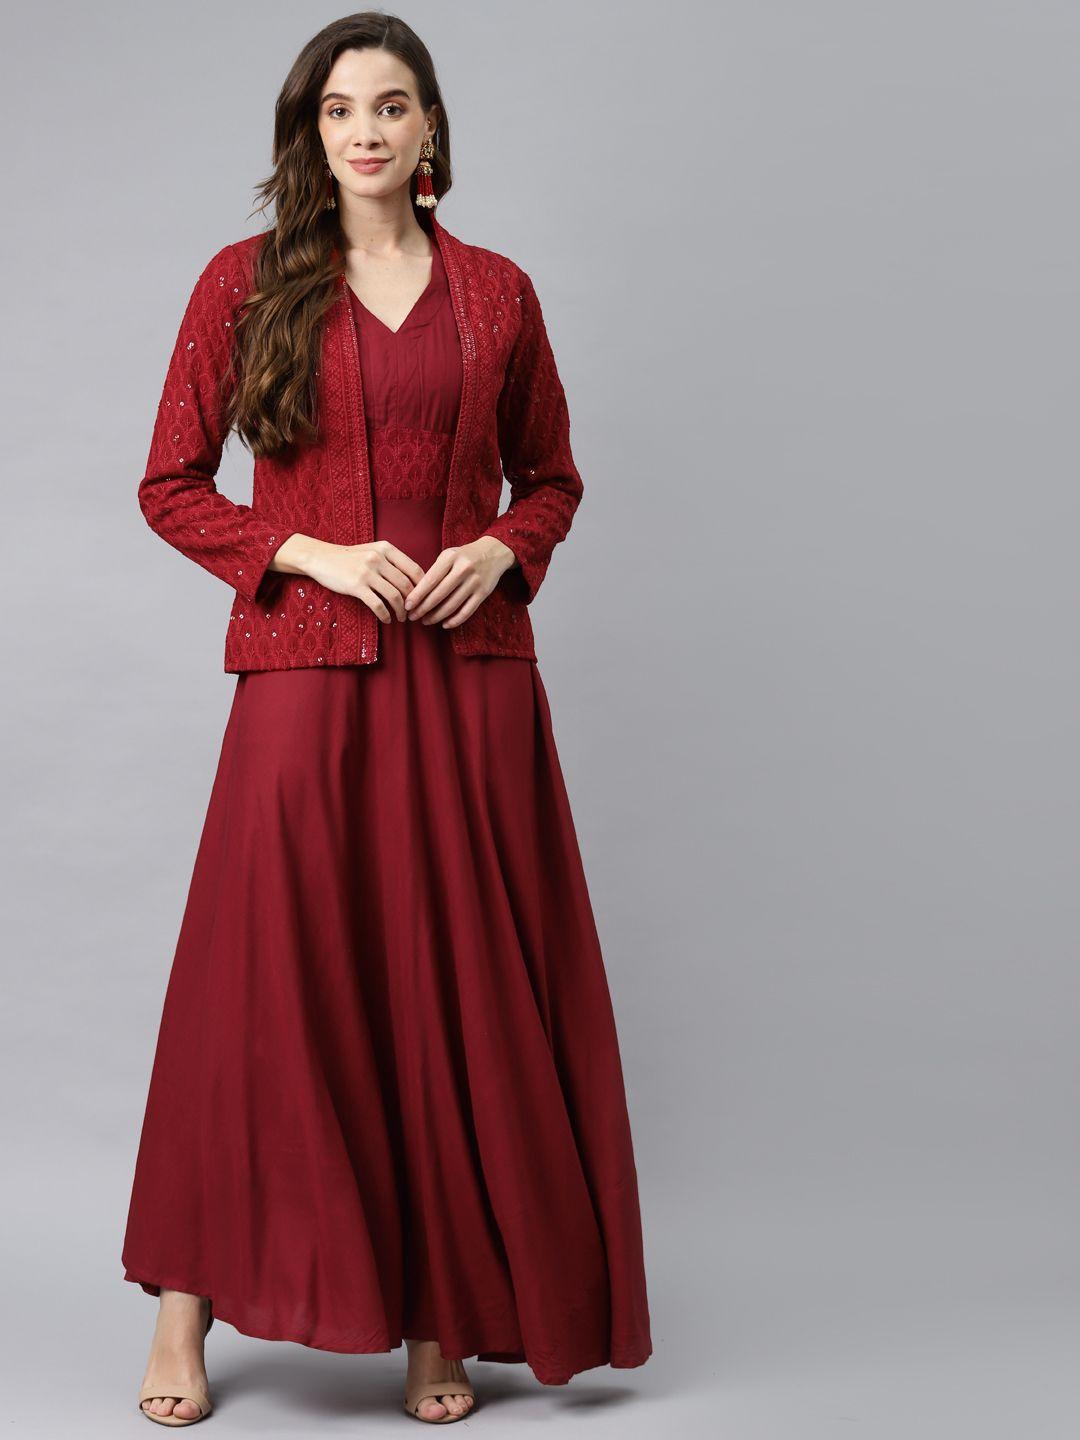 hatheli maroon embroidered detail ethnic maxi dress with jacket